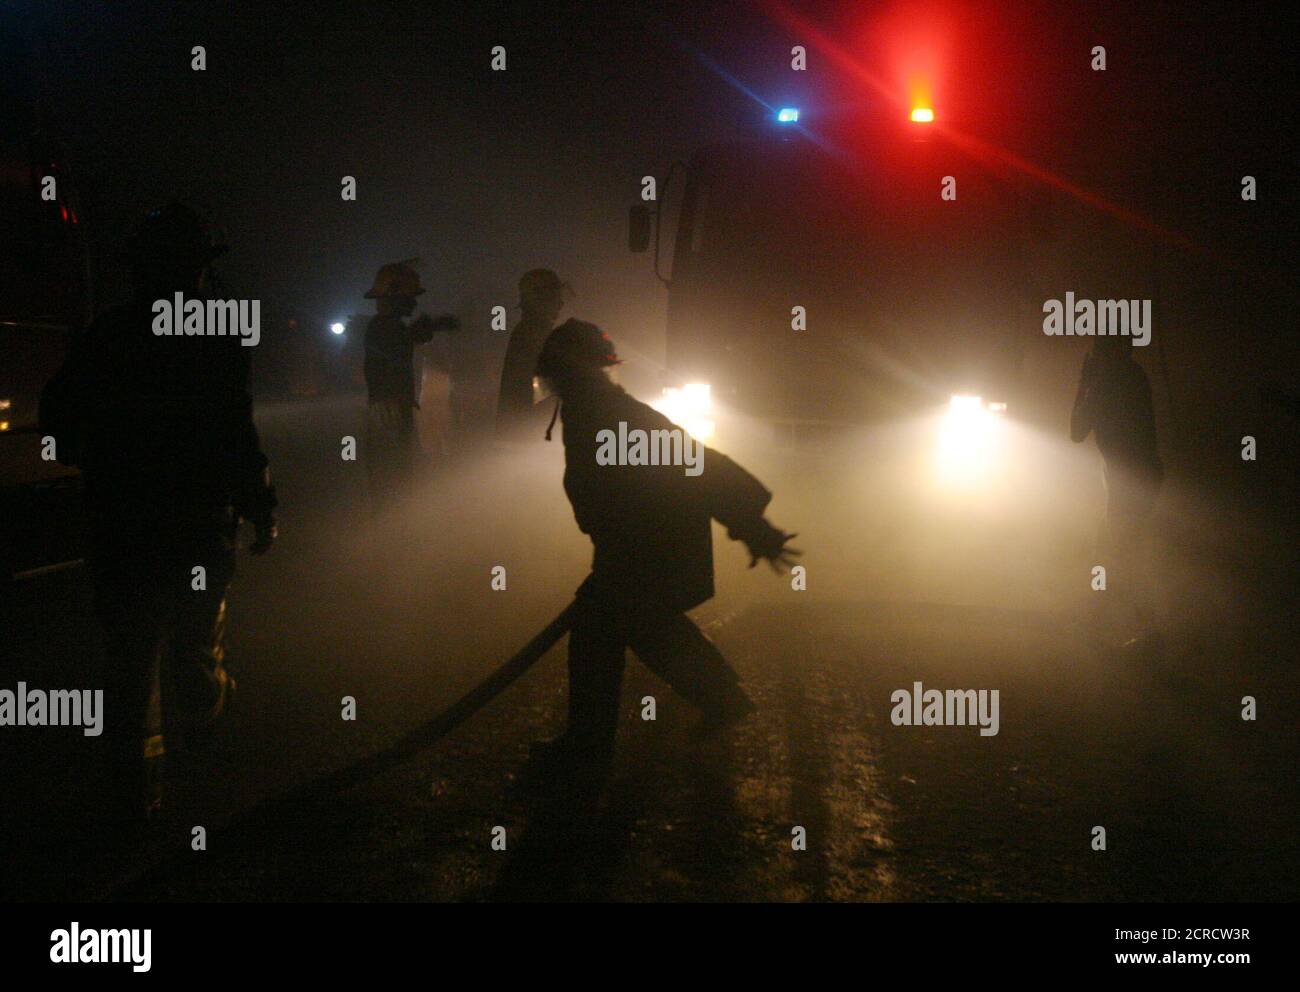 Sri Lankan fire fighters attempt to extinguish a fire at Bata shoe factory early on Friday, south of Colombo August 13, 2004. The company had been shut down during last the few weeks due to problems between the workers' union and management. REUTERS/Anuruddha Lokuhapuarachchi  AL/SH Stock Photo